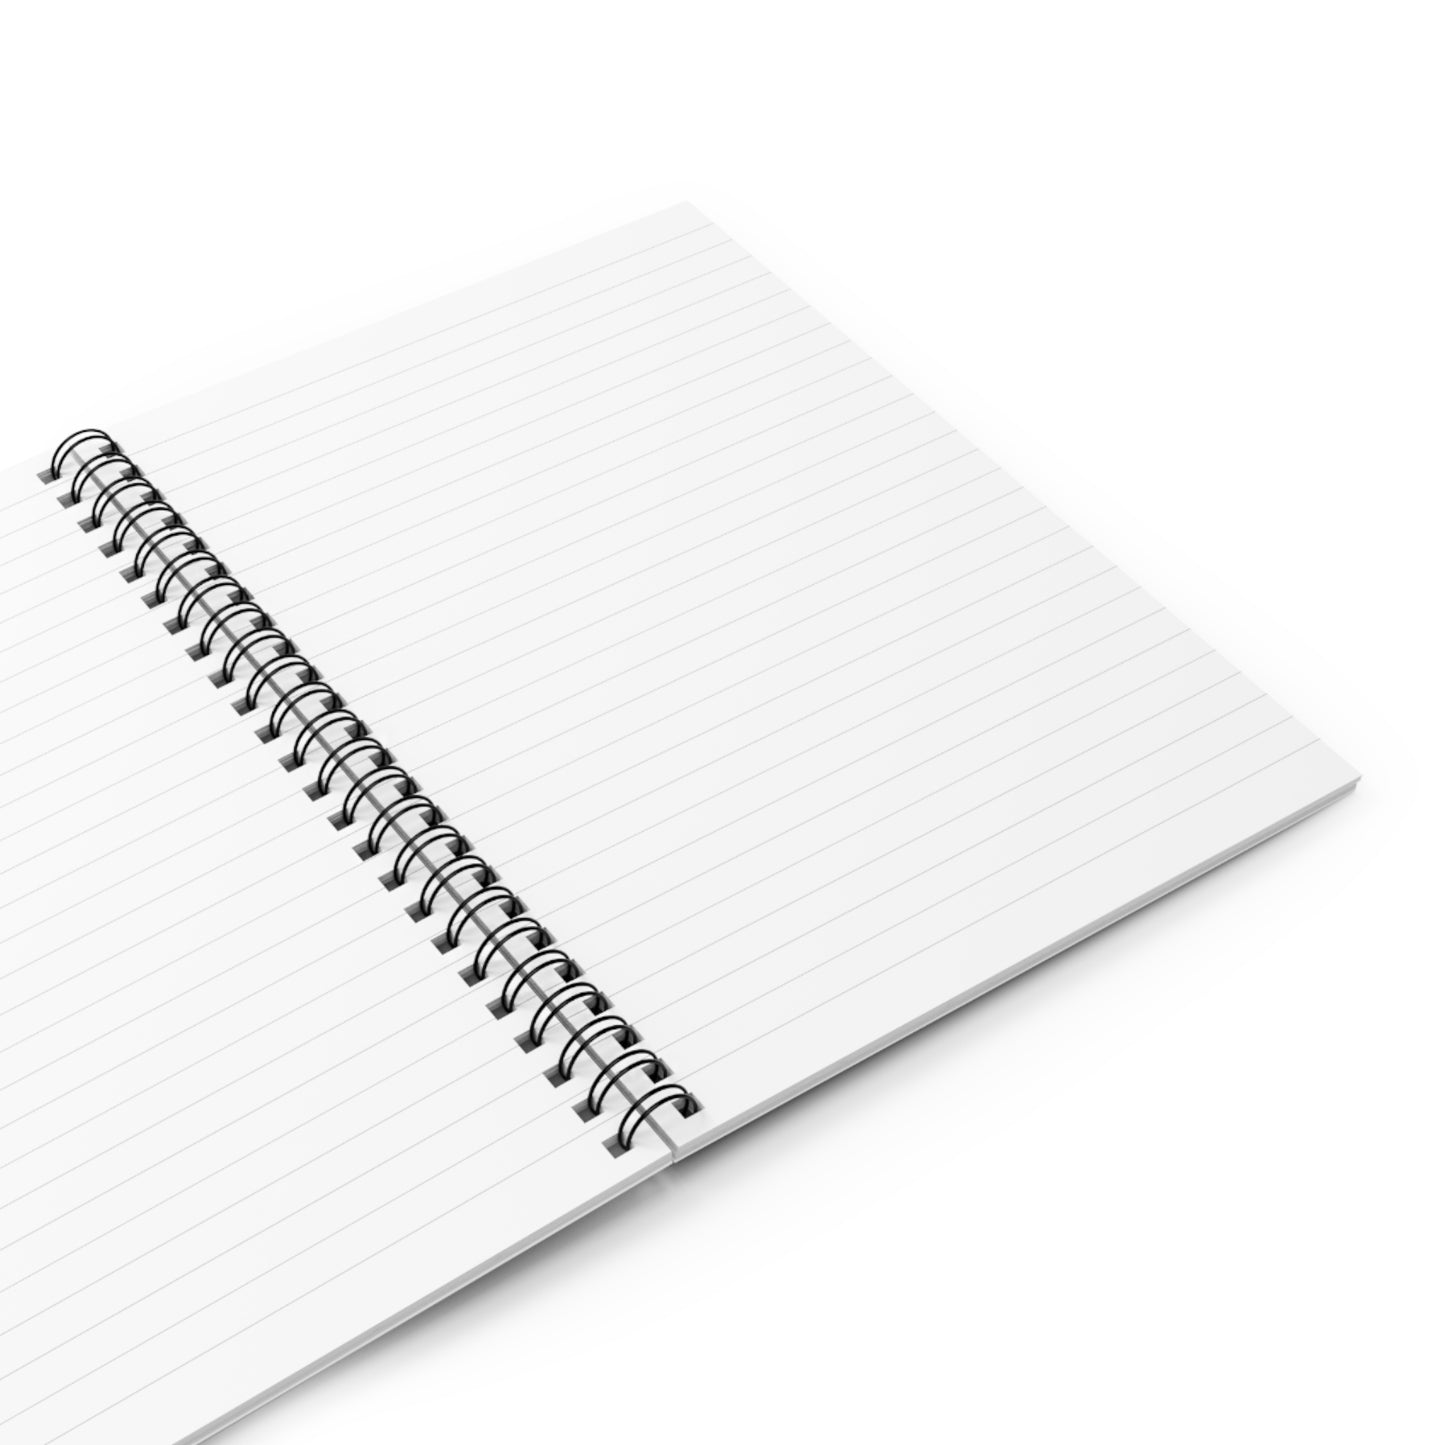 Lioness Arising - Spiral Notebook - Ruled Line - wht